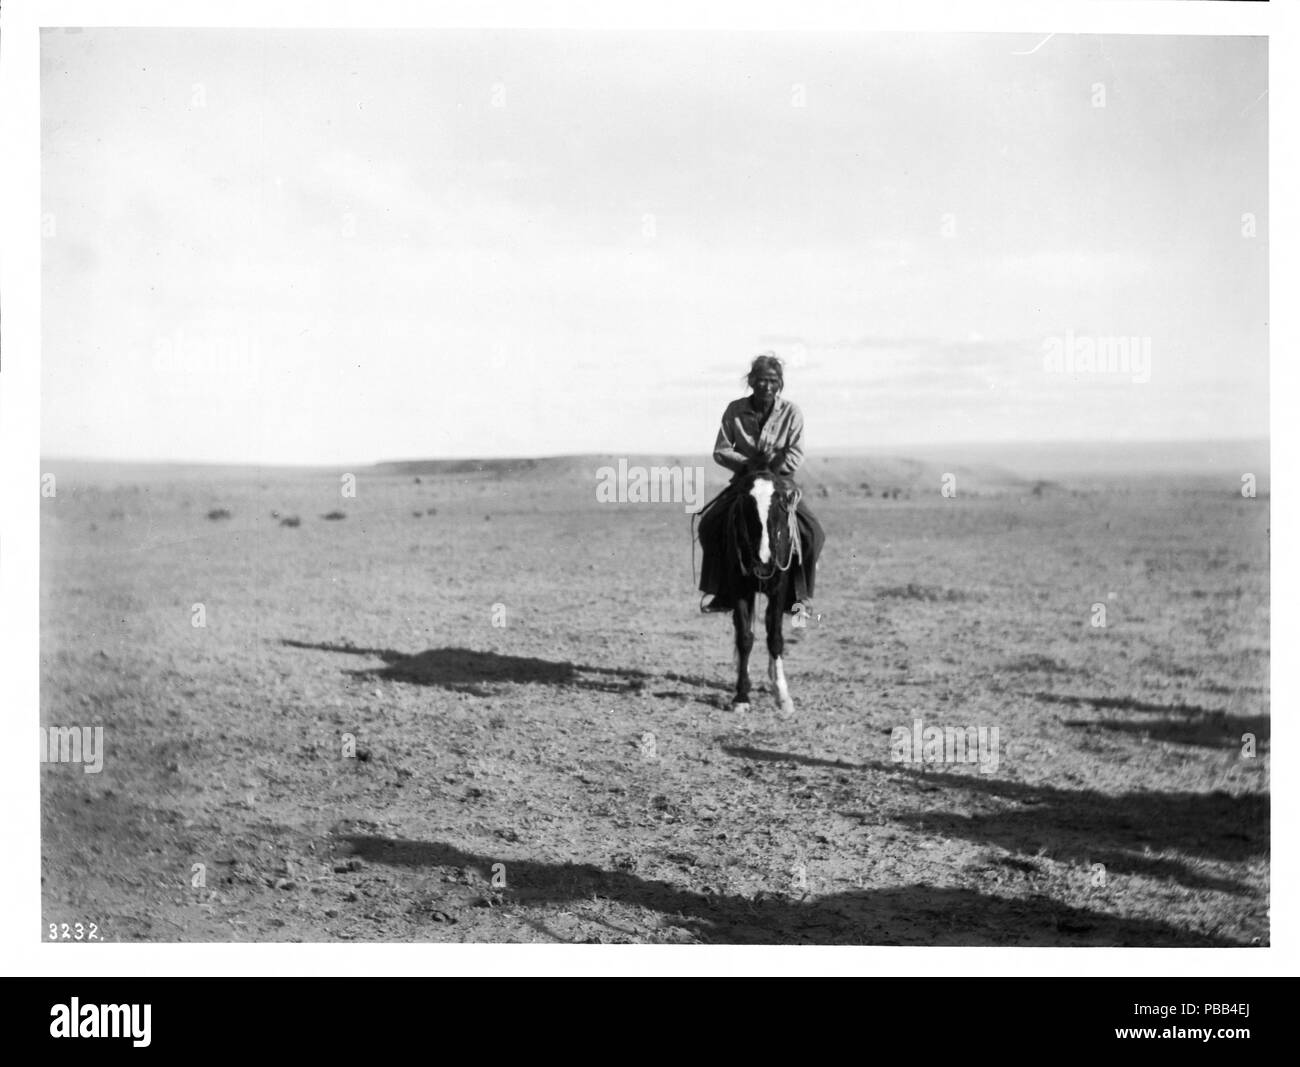 . English: Navajo Indian horseman, ca.1900 Photograph of a Navajo Indian horseman, ca.1900. His hands rest across the horn of the saddle as he approaches straight on. He is wearing trousers and a loose shirt. His long dark hair is pulled back behind his head. He and his horse cast a long shadow to the left on the short wildgrass covered flat landscape.  Call number: CHS-3232 Photographer: Pierce, C.C. (Charles C.), 1861-1946 Filename: CHS-3232 Coverage date: circa 1900 Part of collection: California Historical Society Collection, 1860-1960 Type: images Part of subcollection: Title Insurance an Stock Photo